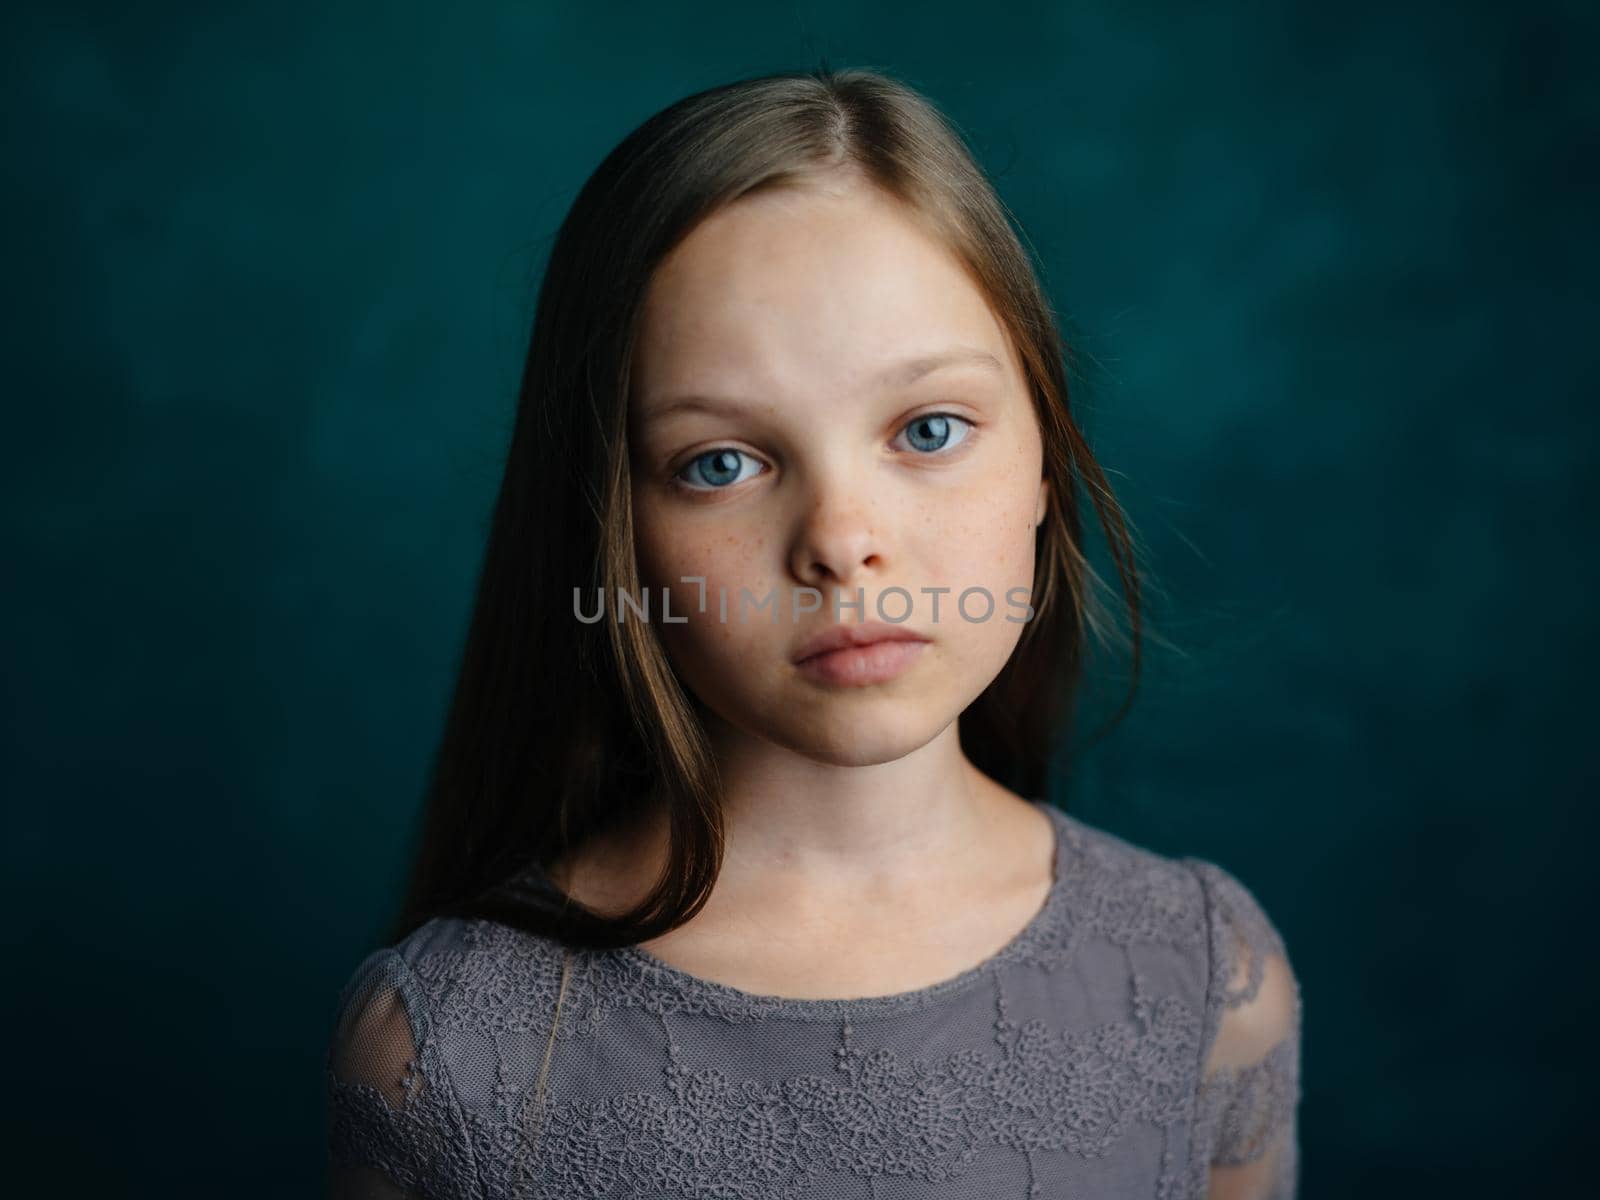 Cute blue-eyed girl in a gray dress on a green background cropped view by SHOTPRIME